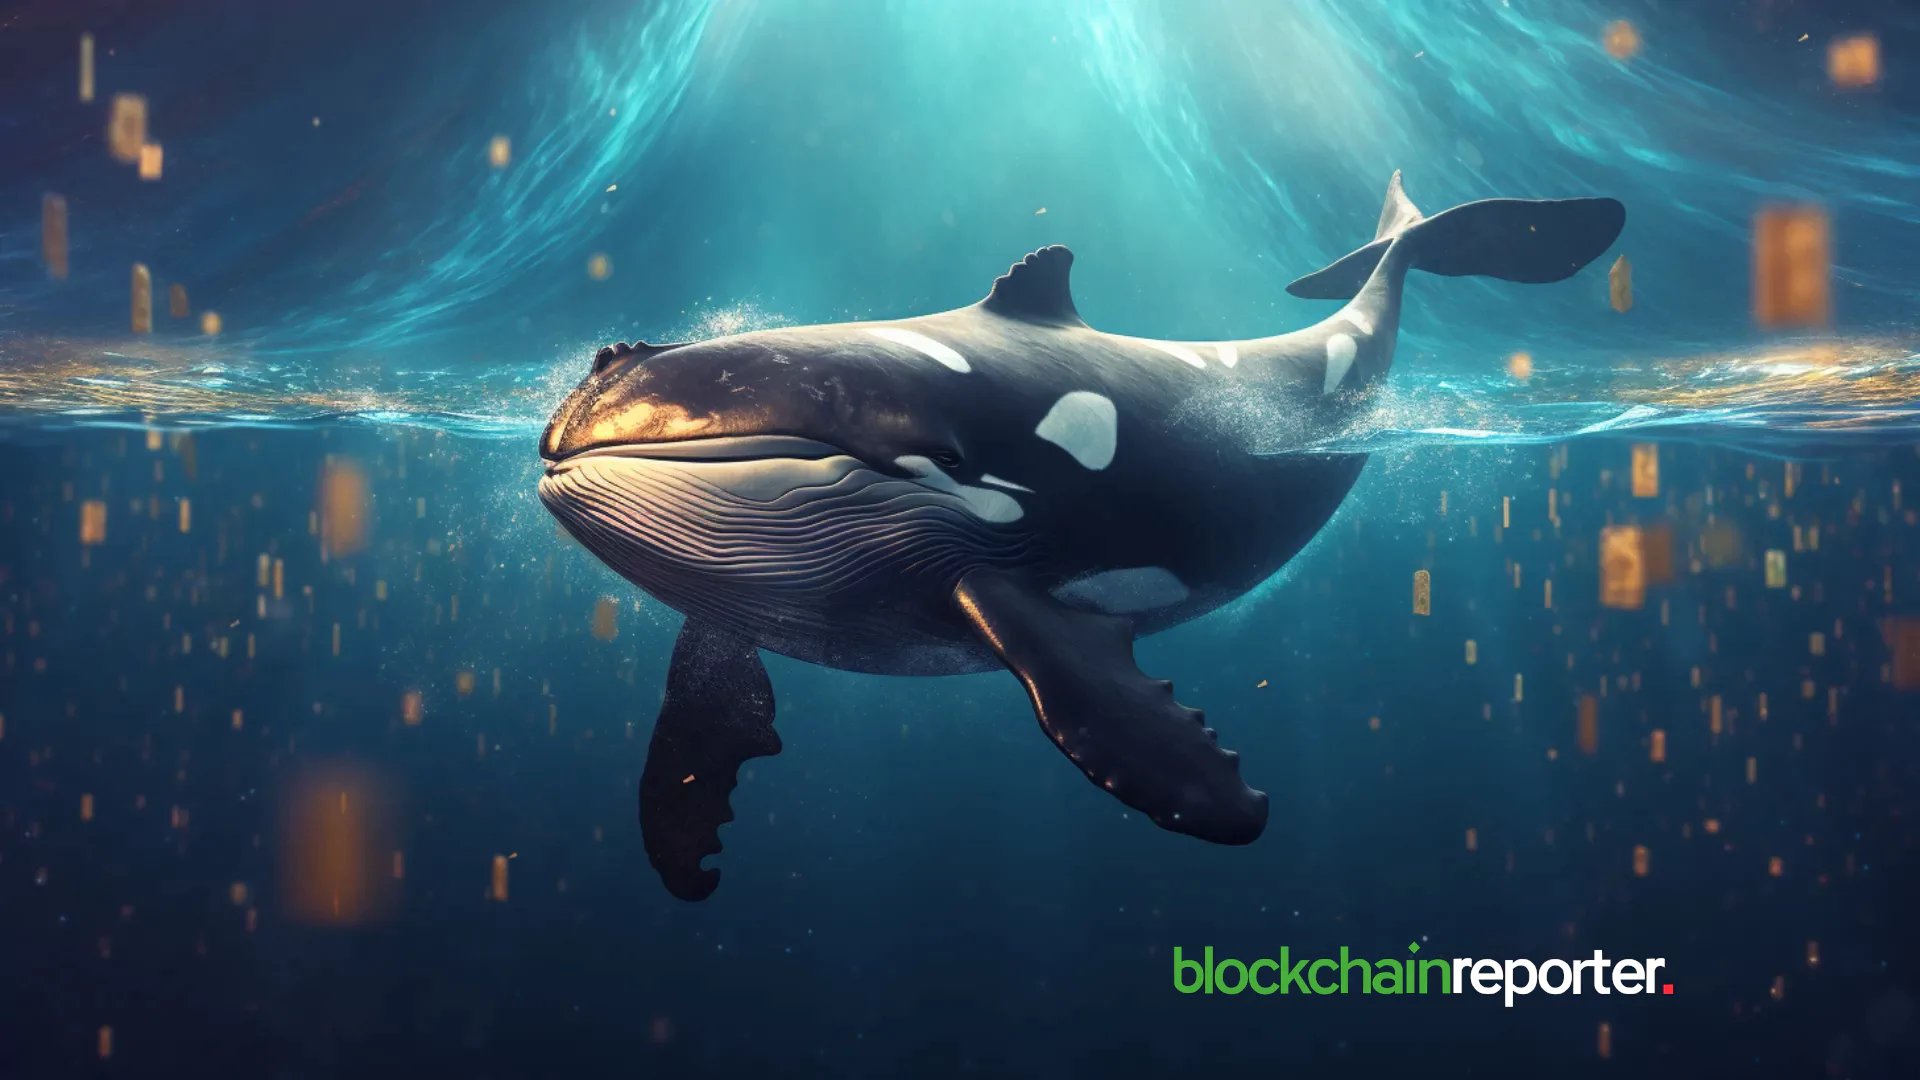 Bitcoin (BTC) Price Faces Slump as Bitfinex Whales Reduce Long Positions, Reports Lookonchain